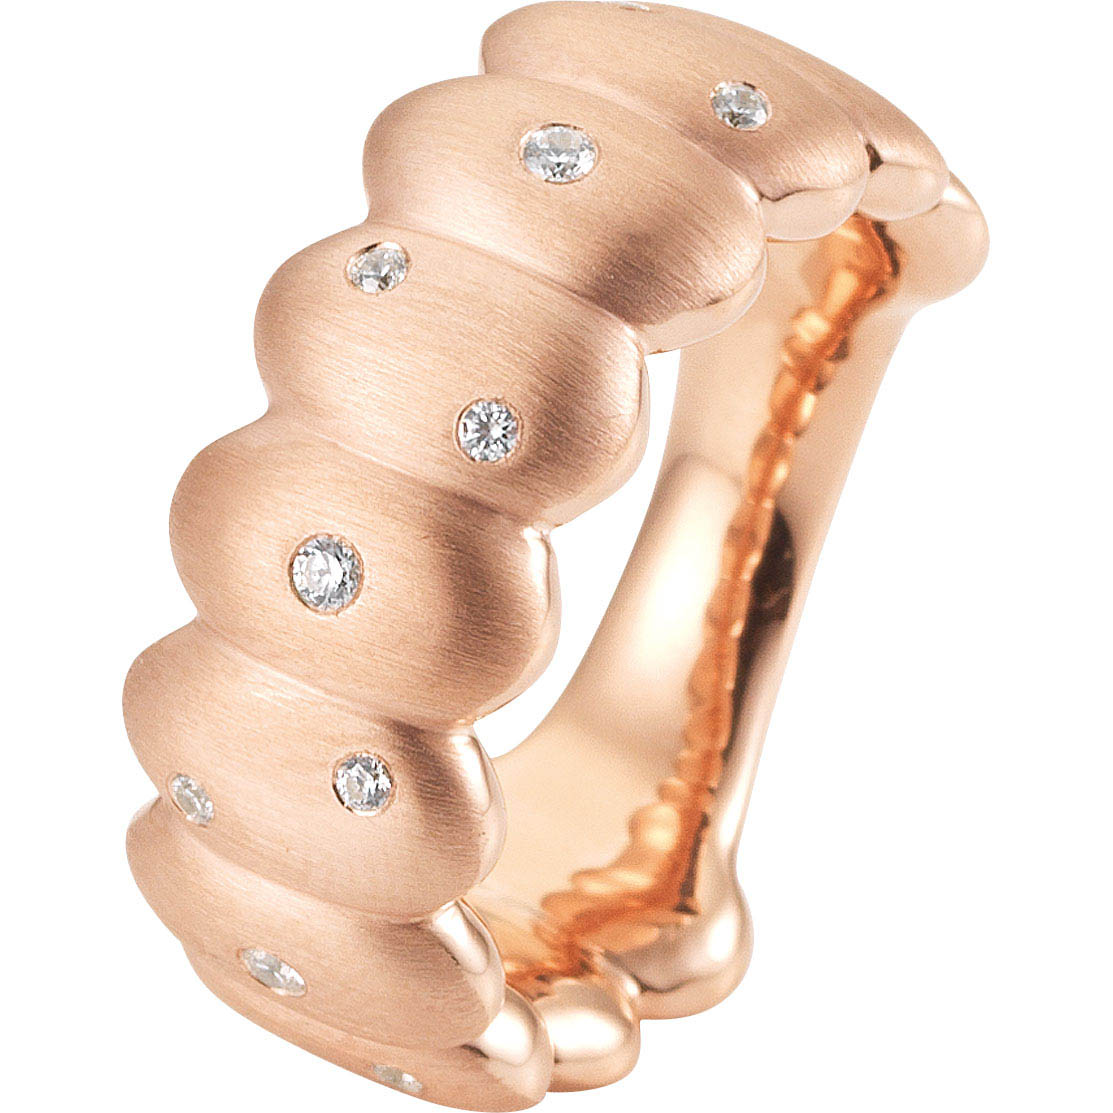 OEM rose gold plated ring jewelry With over 20 years of expertise in the industry